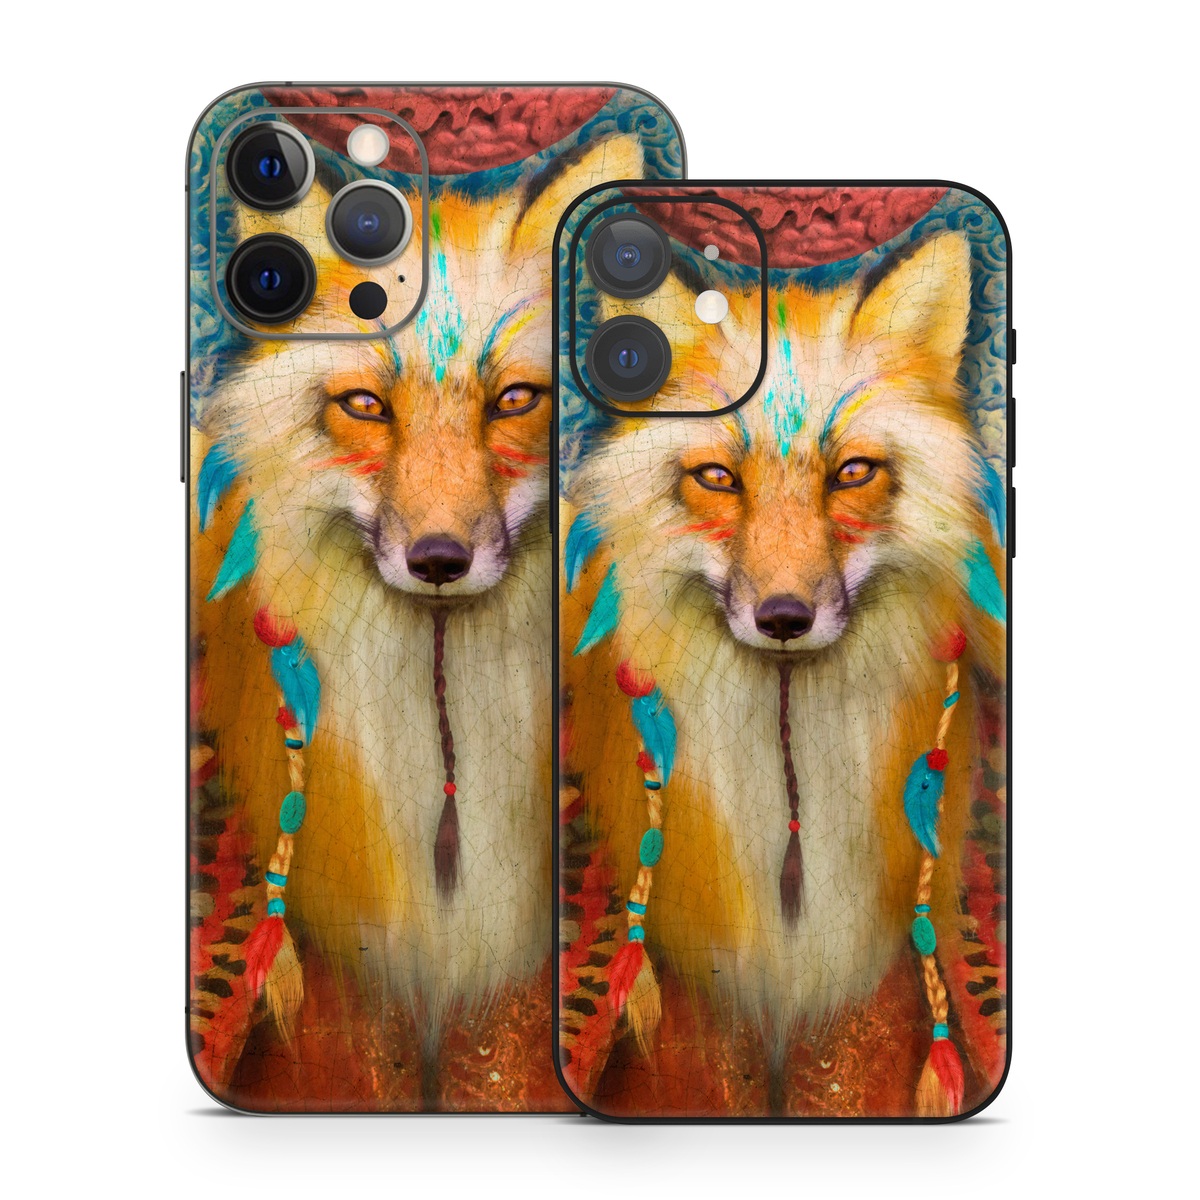 iPhone 12 Series Skin design of Red fox, Canidae, Fox, Wildlife, Swift fox, Carnivore, Jackal, Fur, Snout, Art, with red, black, gray, green, blue colors